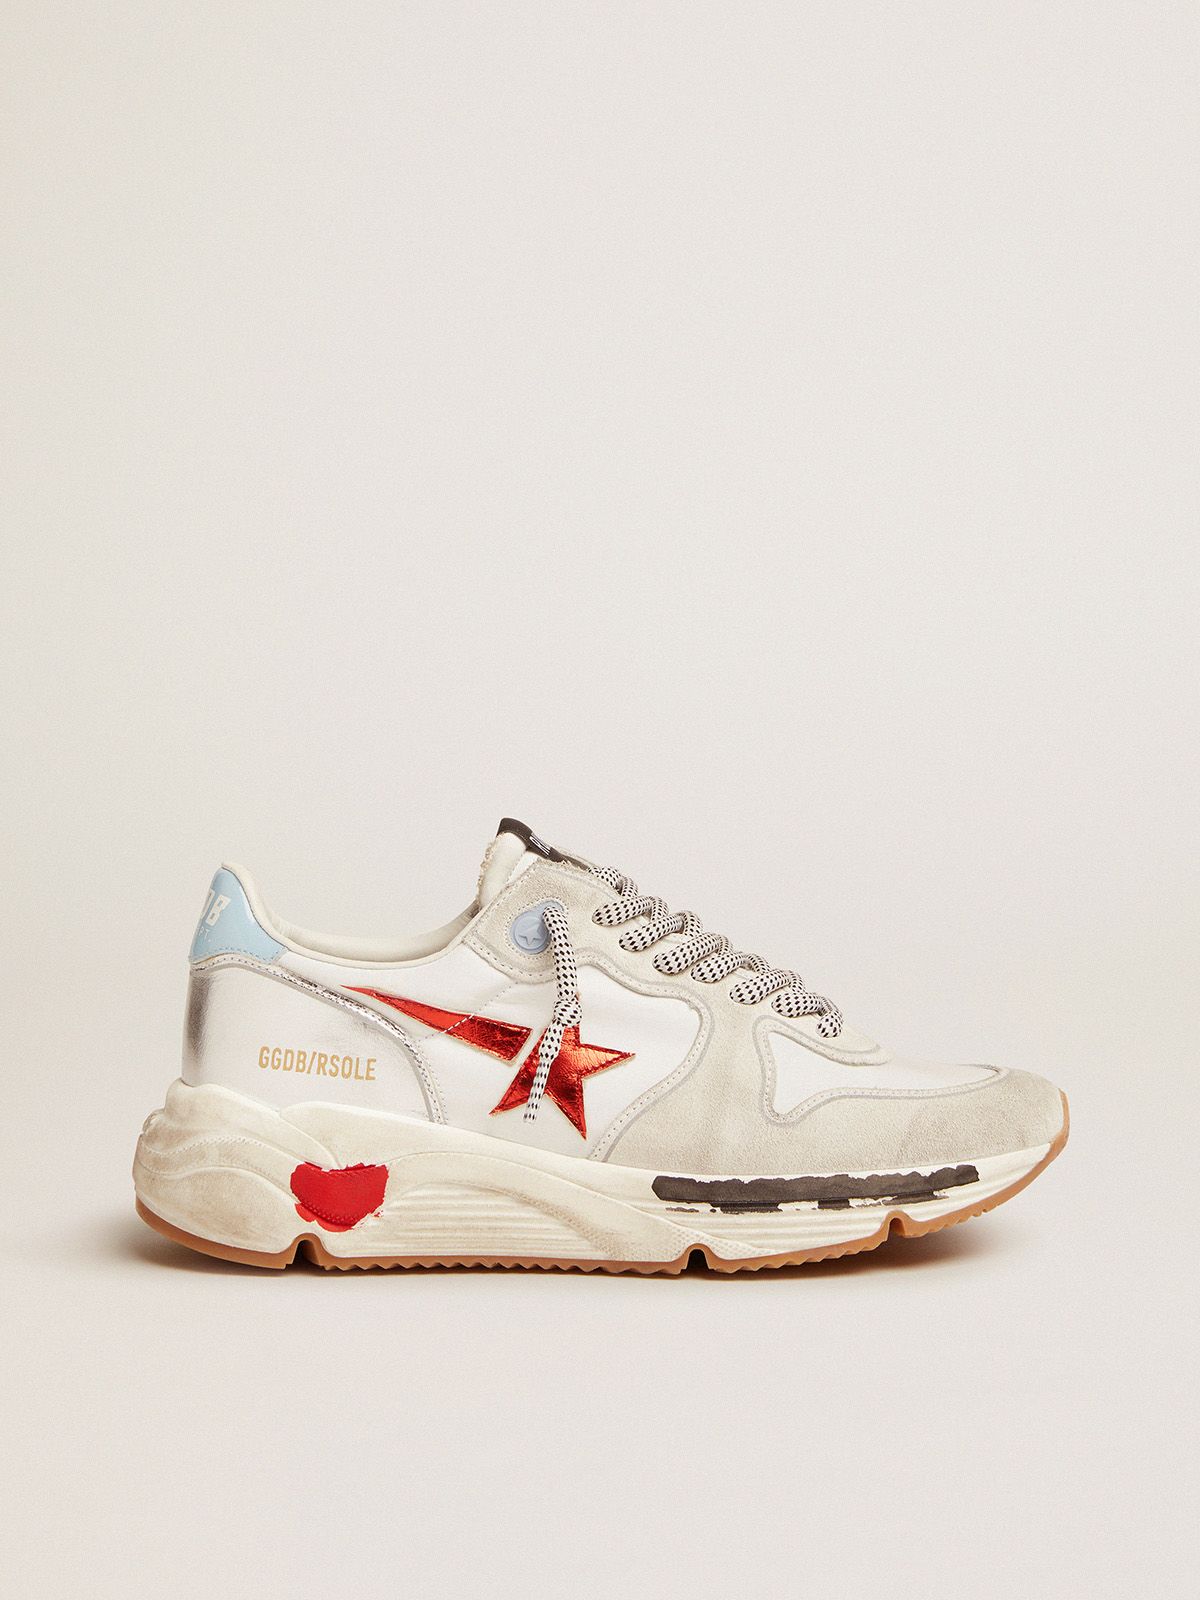 golden goose with red Running nylon in Sole laminated sneakers star suede leather and